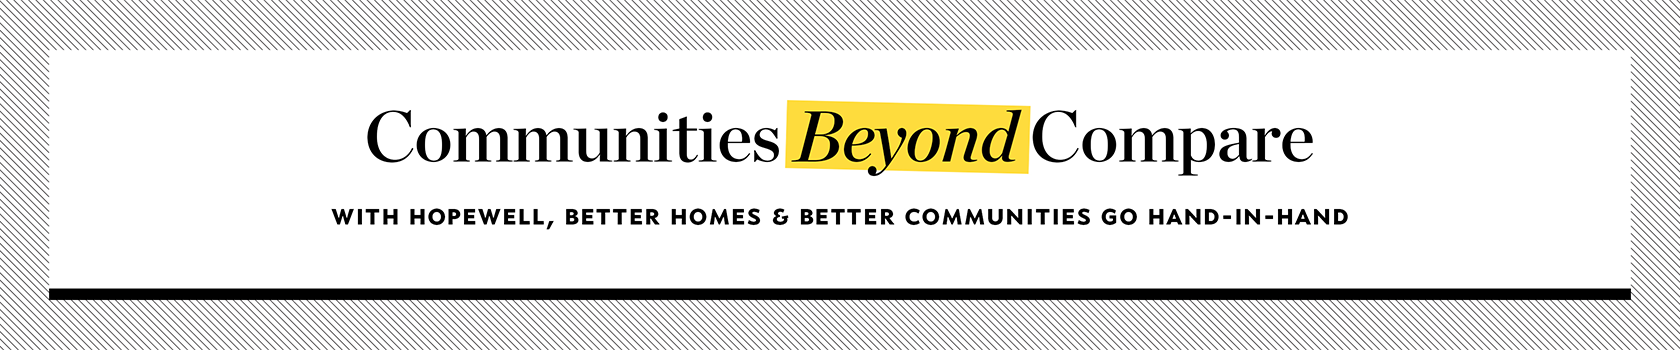 Communities Beyond Compare  banner